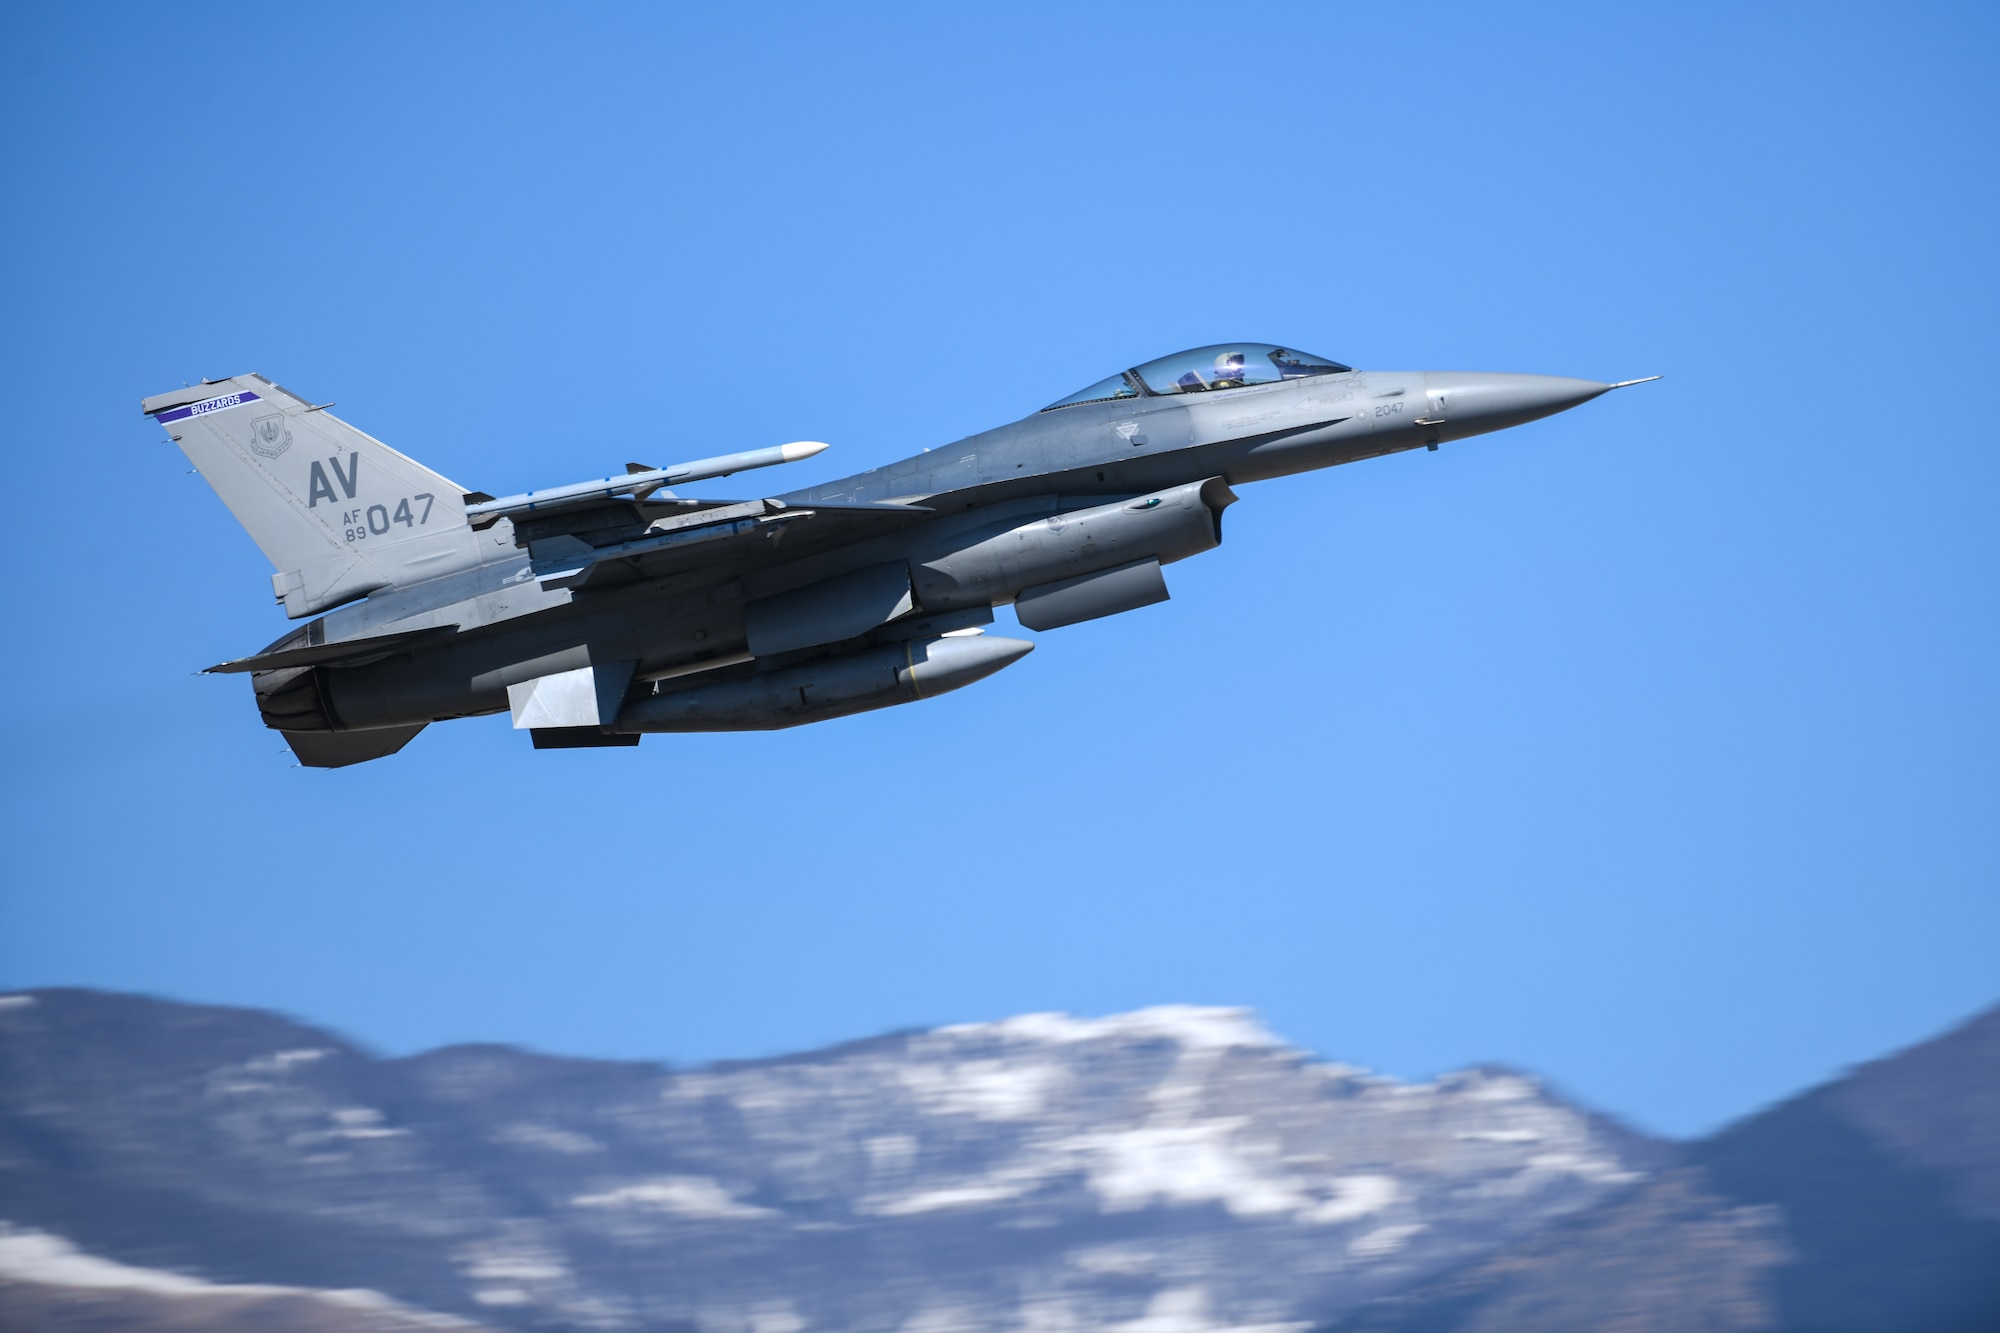 A U.S. Air Force F-16 Fighting Falcon from the 510th Fighter Squadron soars above Aviano Air Base, Italy, March 16, 2020. The 31st Fighter Wing is dedicated to remaining lethal and rapidly ready while operating within the confines of the decrees set by the Italian government. (U.S. Air Force photo by Airman 1st Class Ericka A. Woolever)